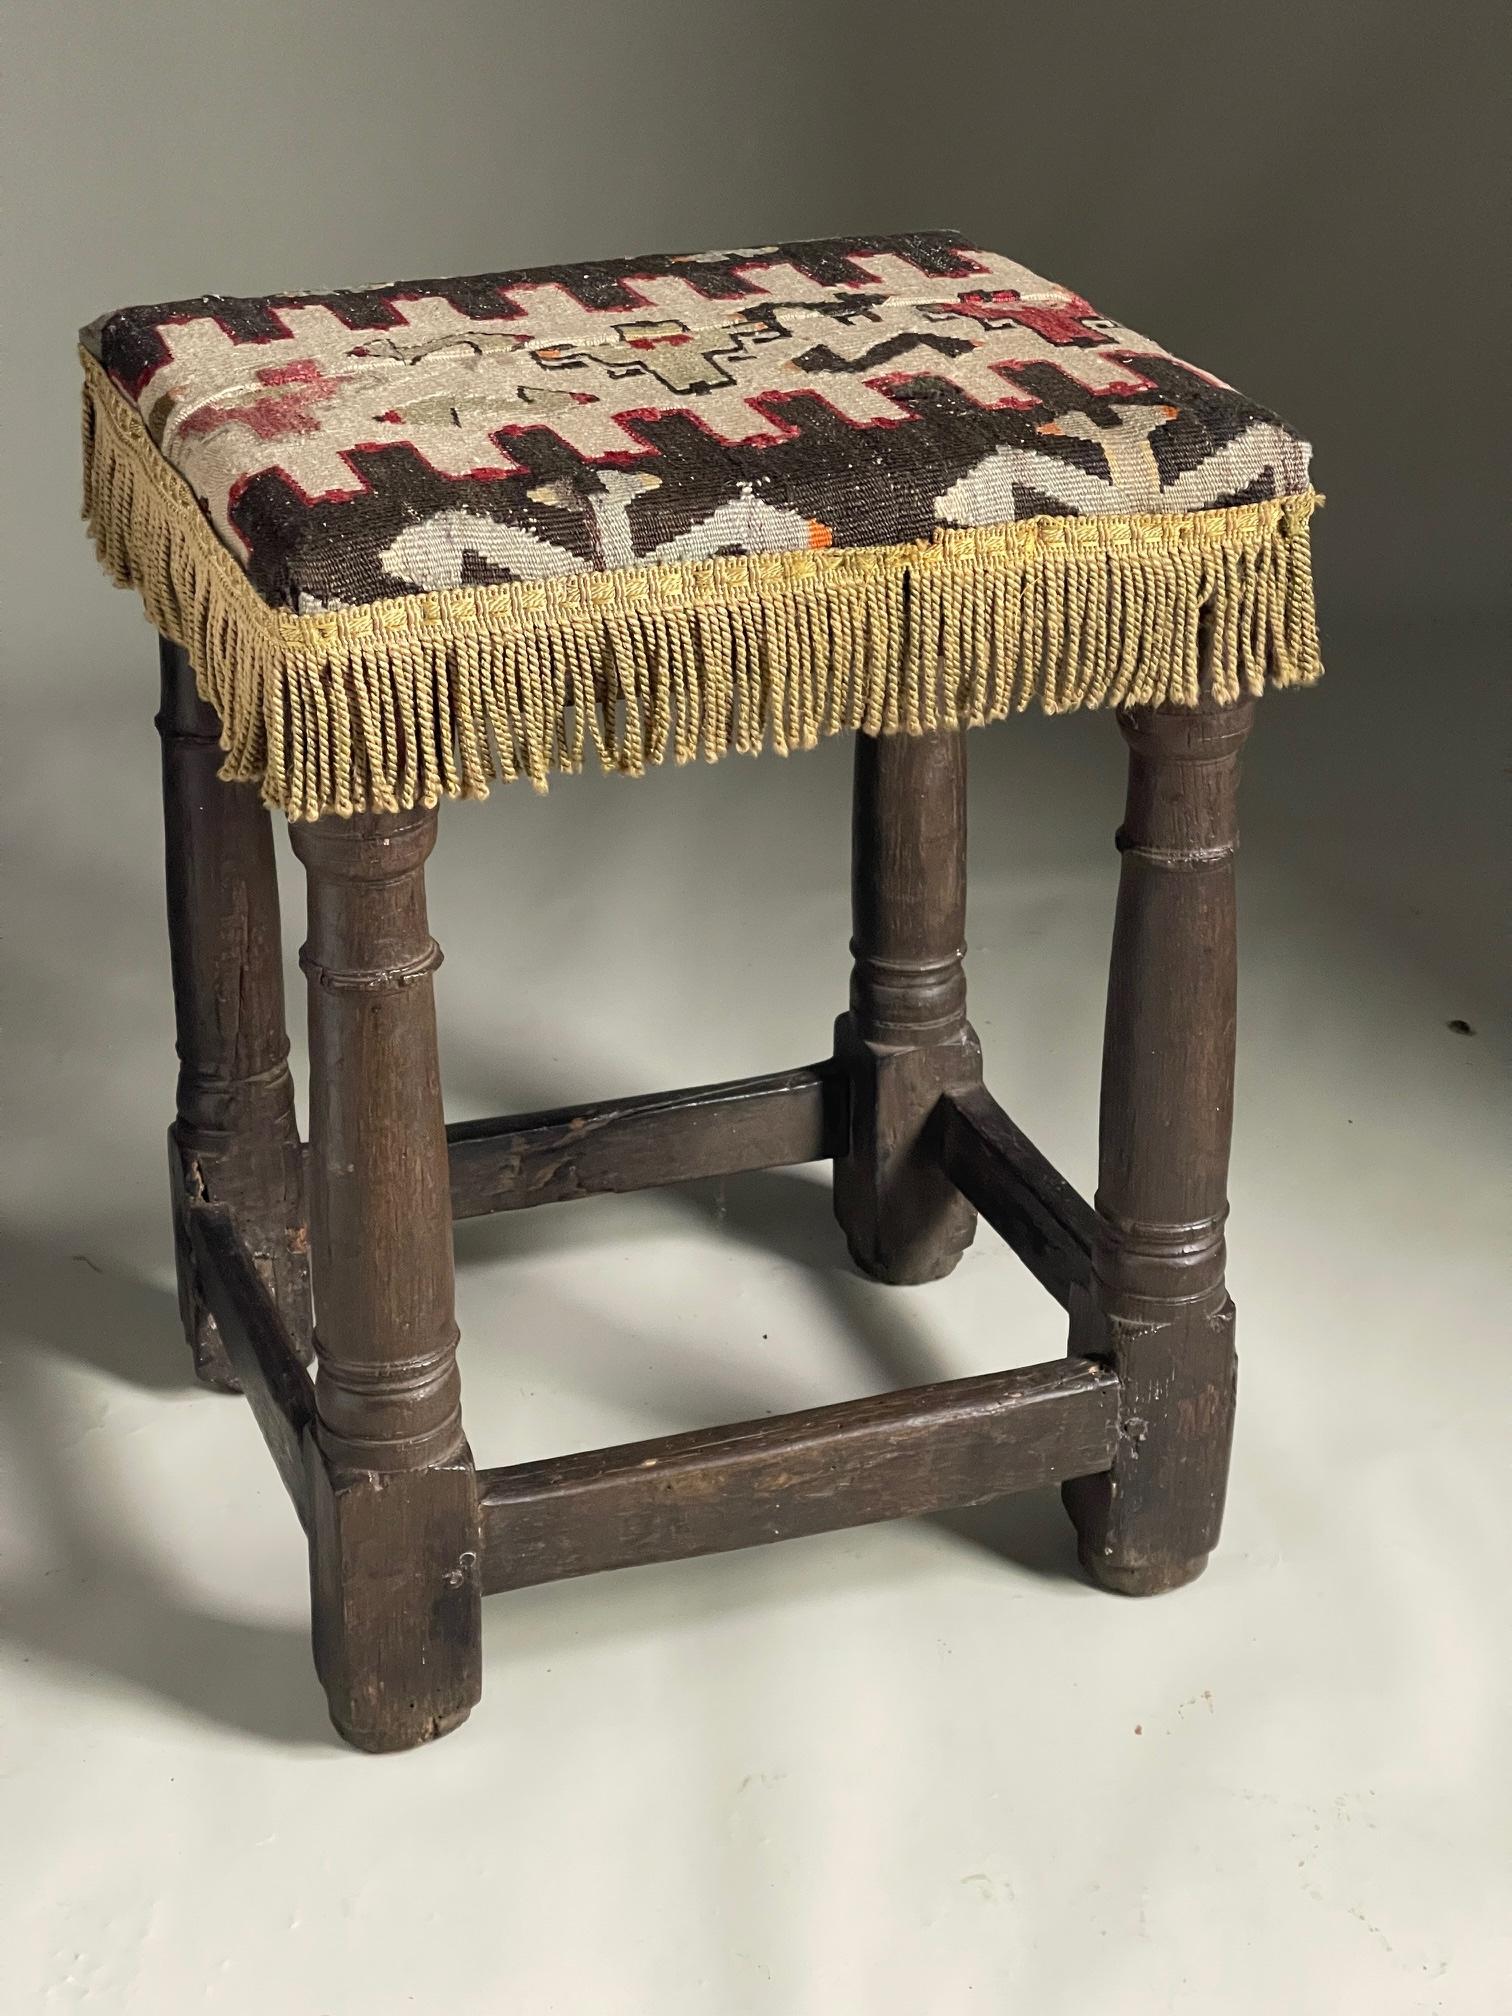 C1680 oak upholstered stool with turned legs and square section stretchers top upholstered with kilim rug

52 cms high 40 long 34 deep price
